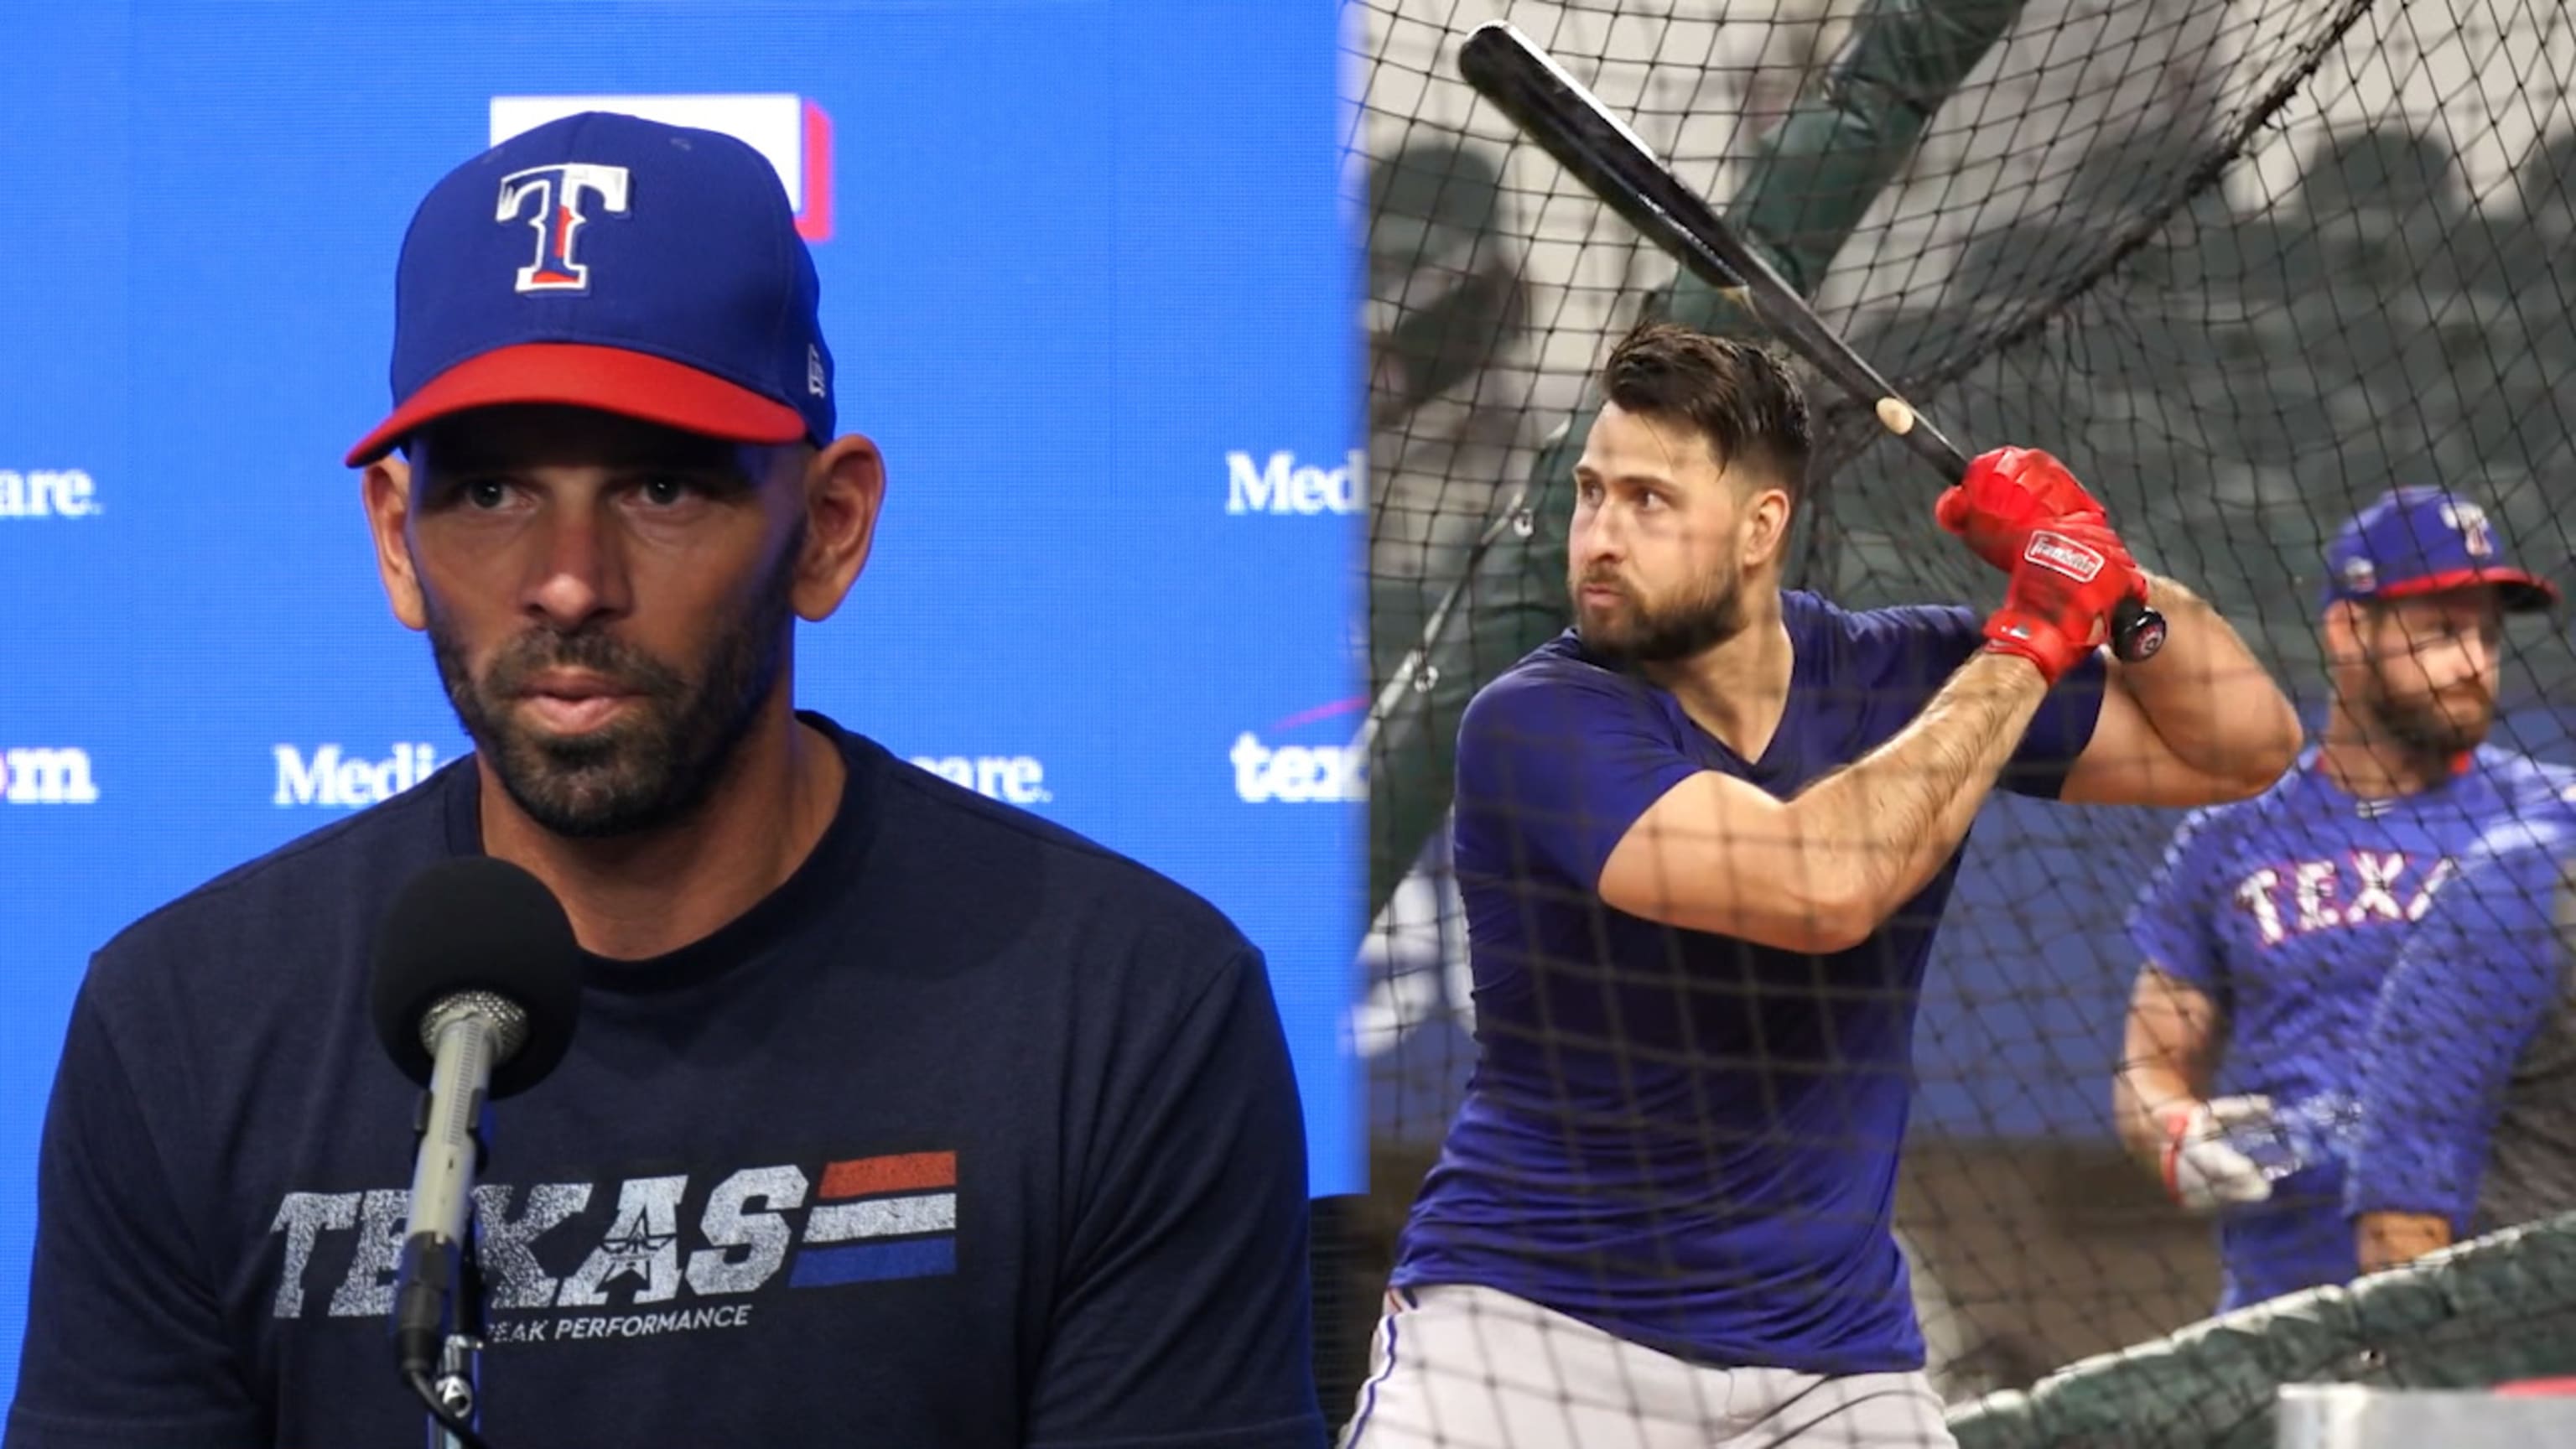 Rangers OF Joey Gallo tests positive for COVID-19